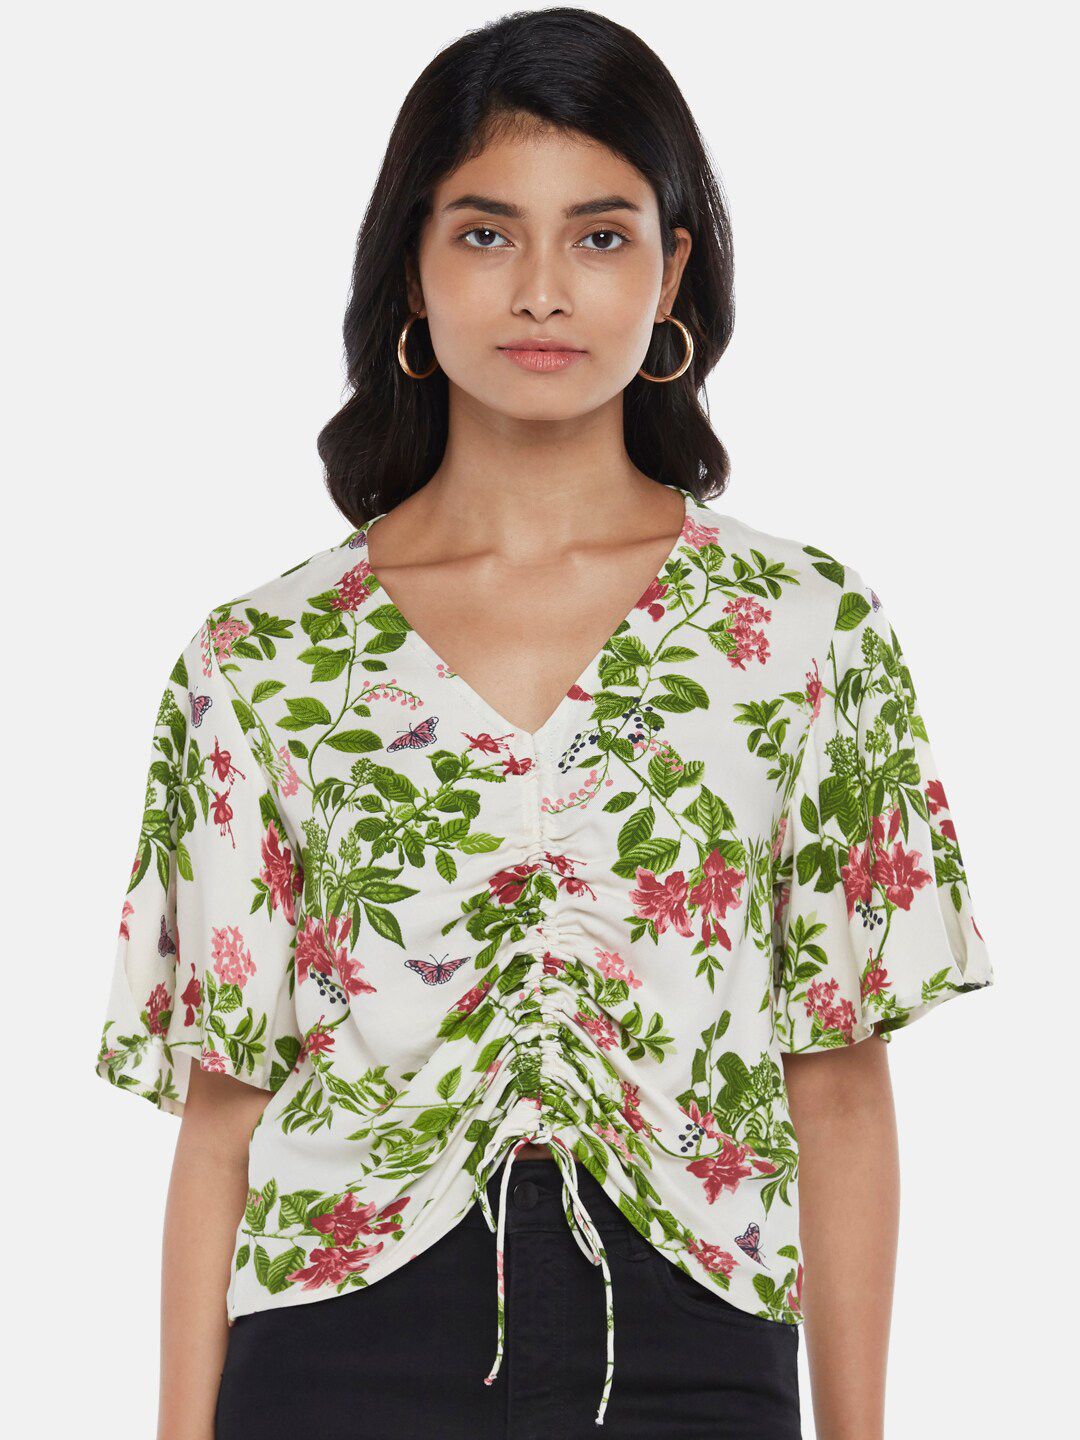 Honey by Pantaloons Off White Floral Print Ruched Top Price in India